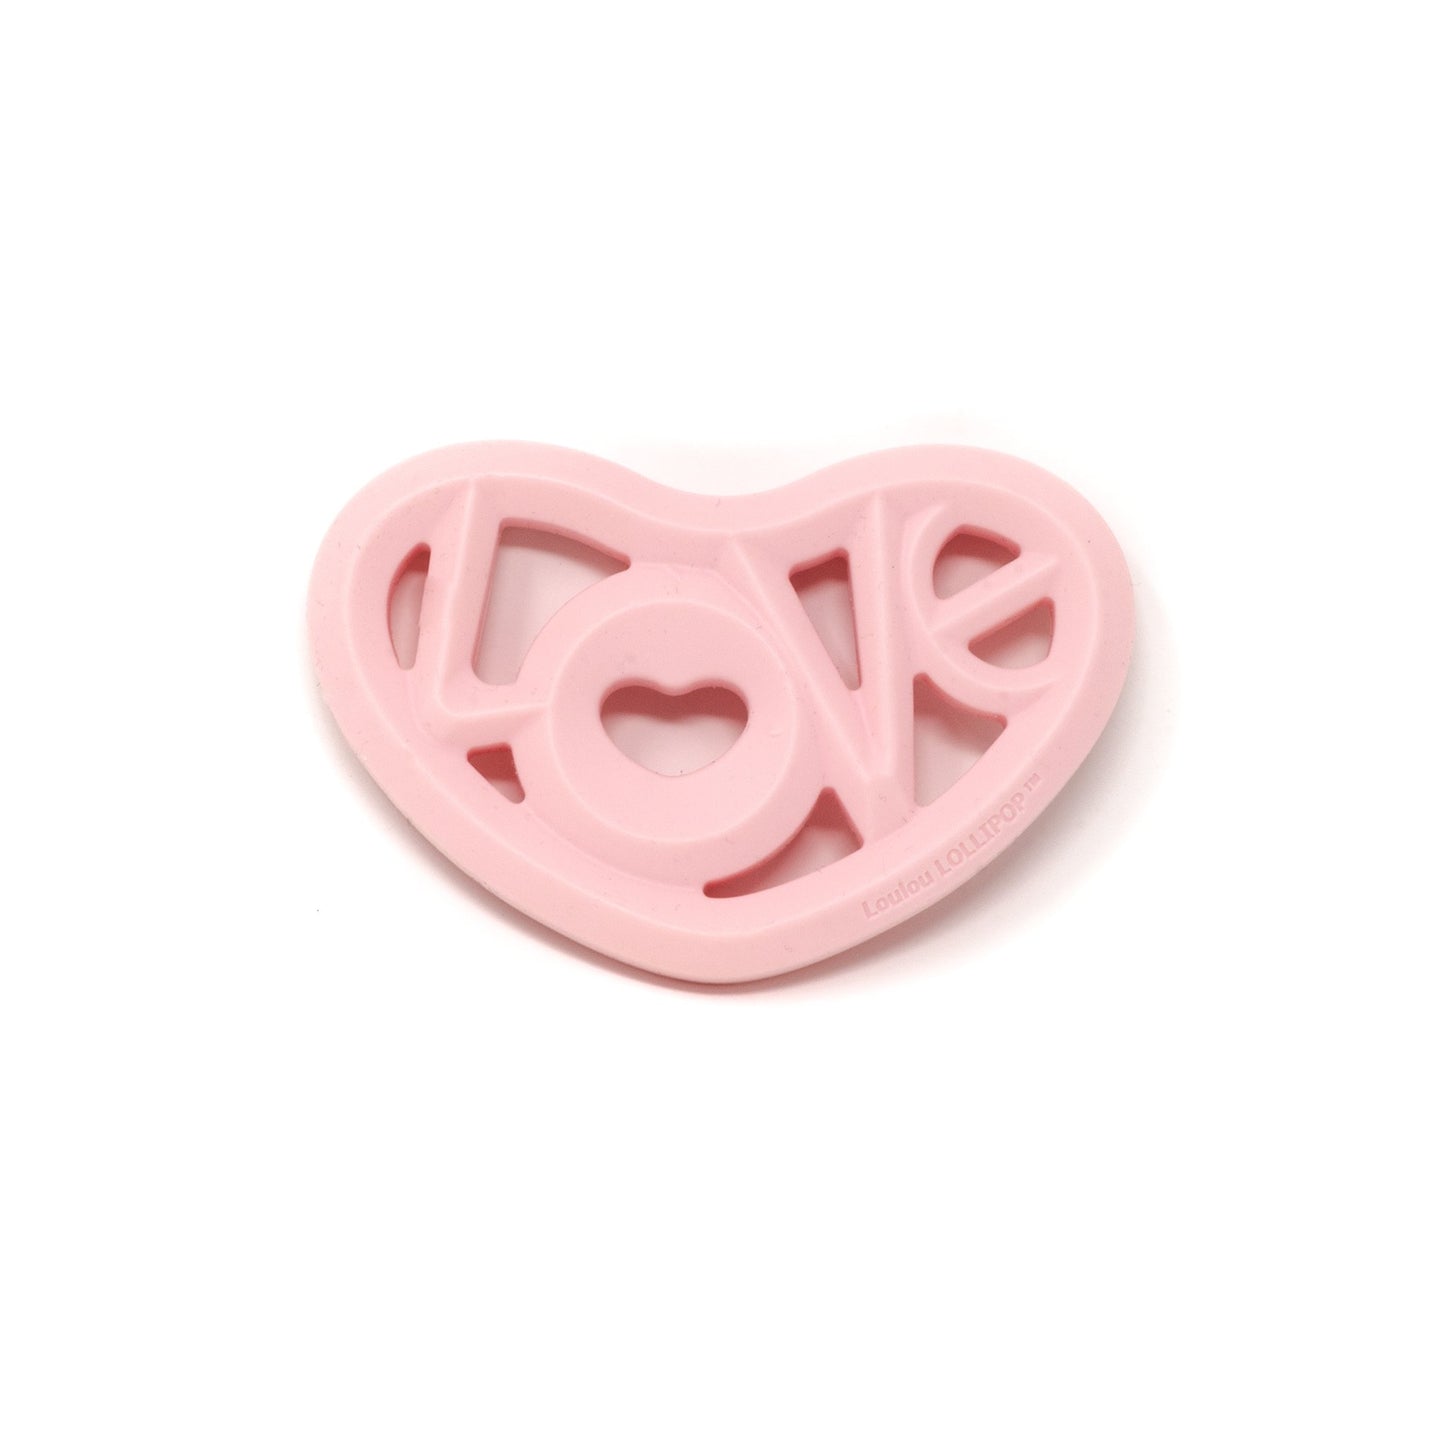 pink silicone heart teether made by Loulou Lollipop